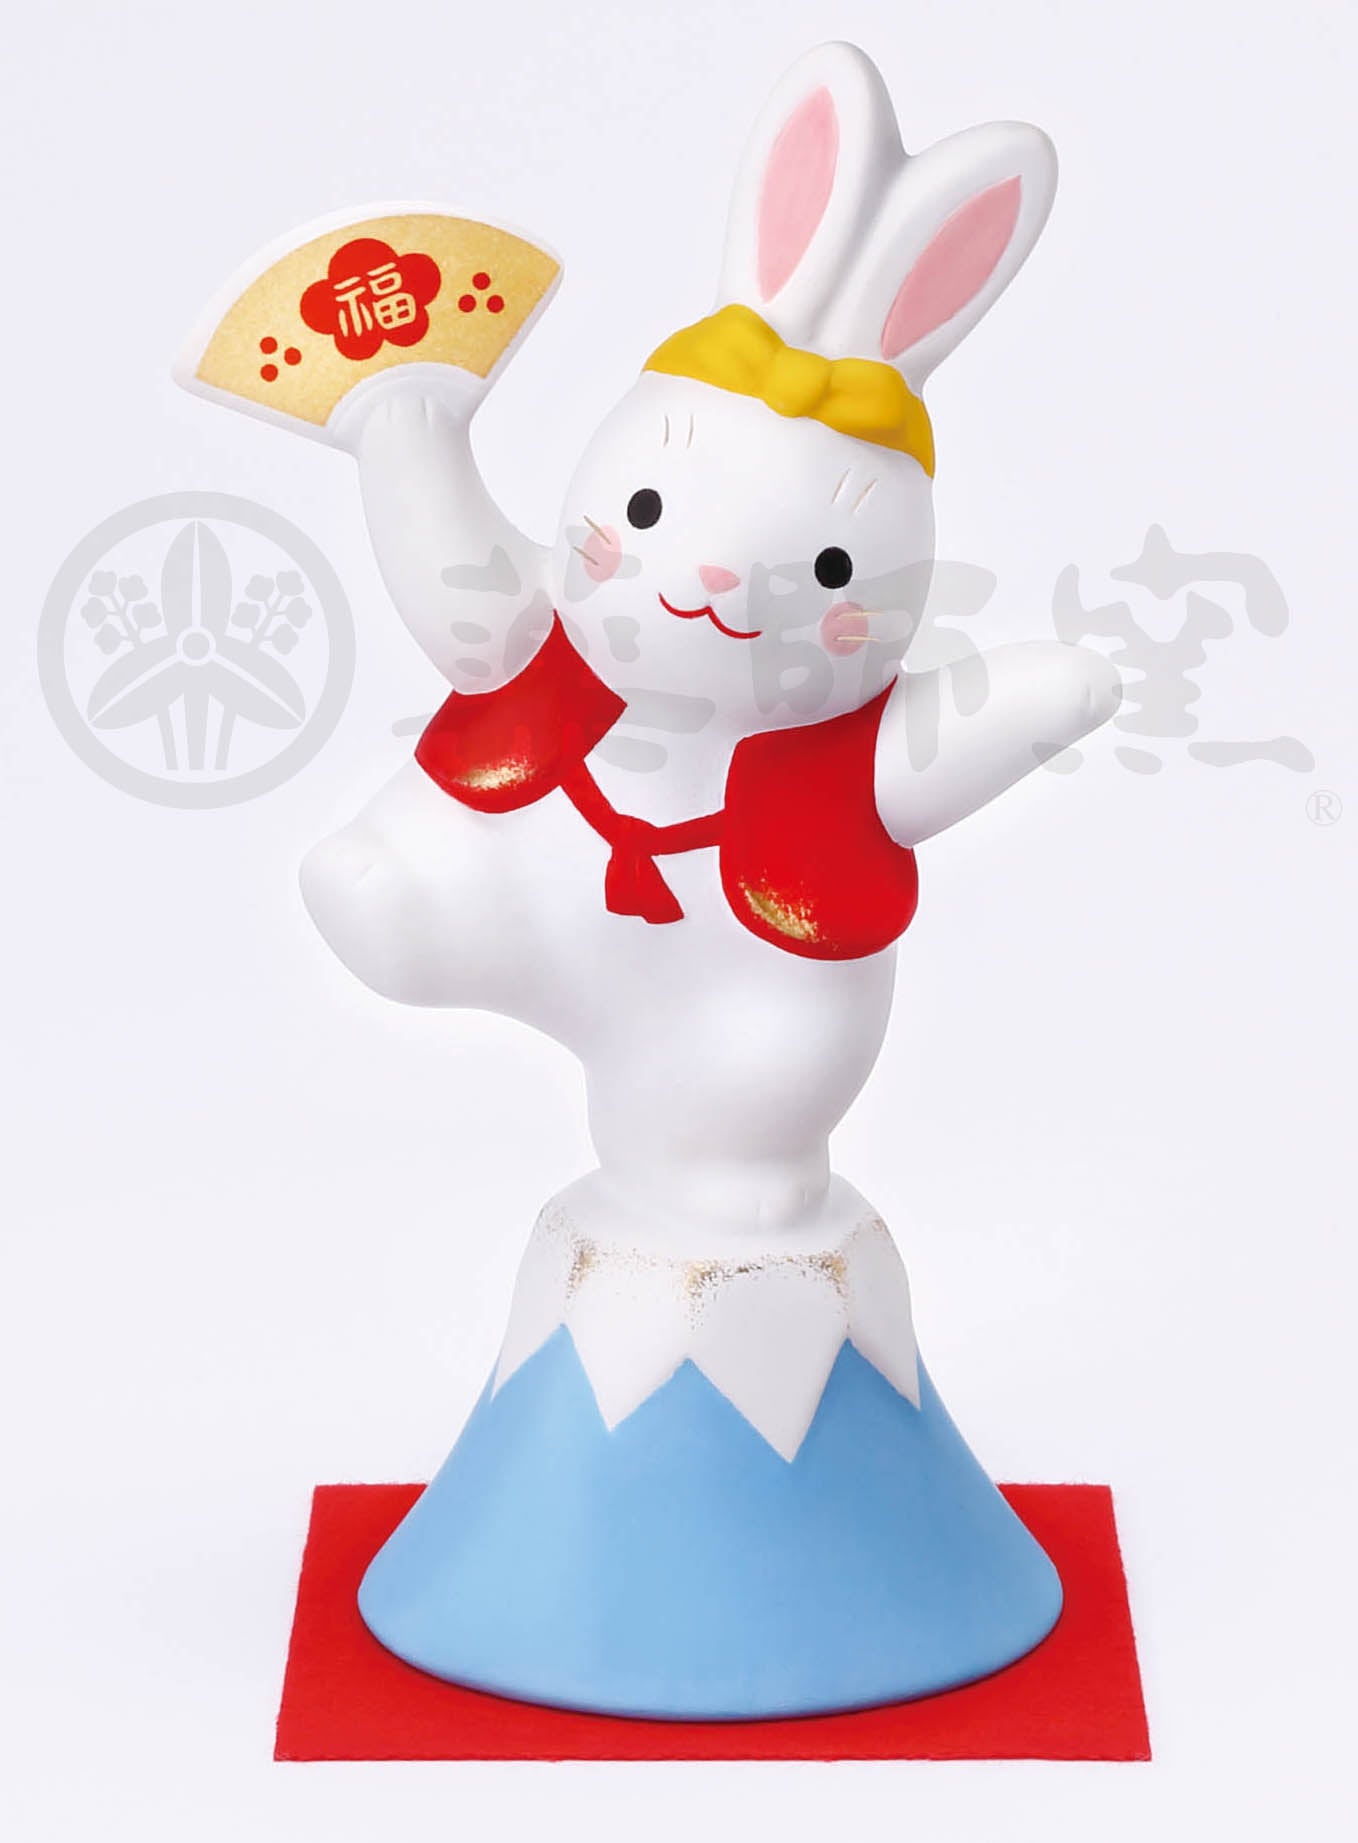 Best Vintage Easter Bunny Figurines 2023 - Where to Buy Porcelain Easter  Bunnies